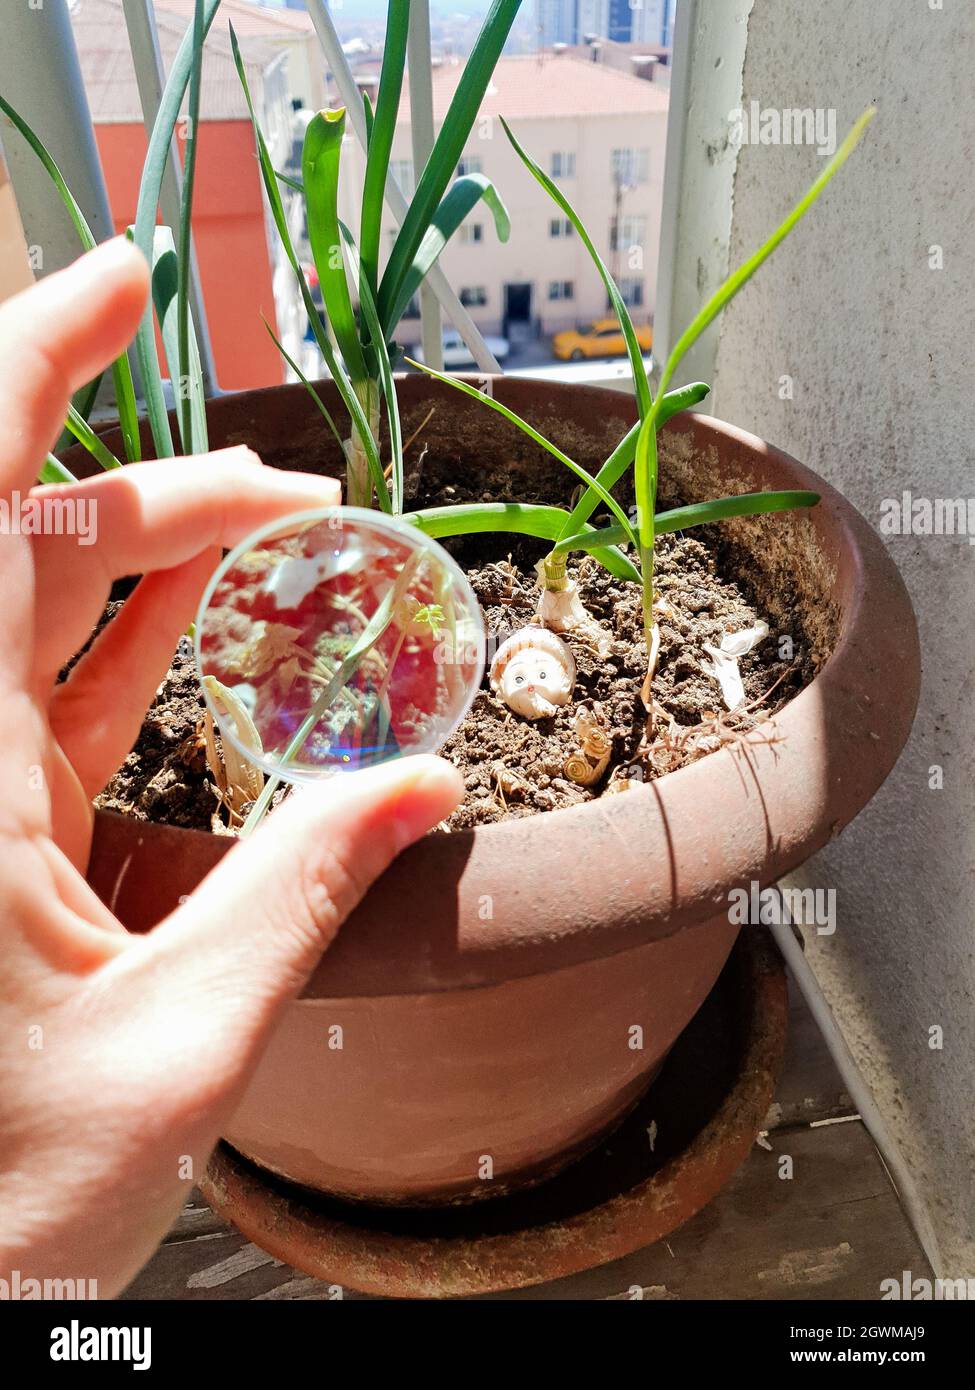 Midsection Of Person Holding Potted Plant Stock Photo